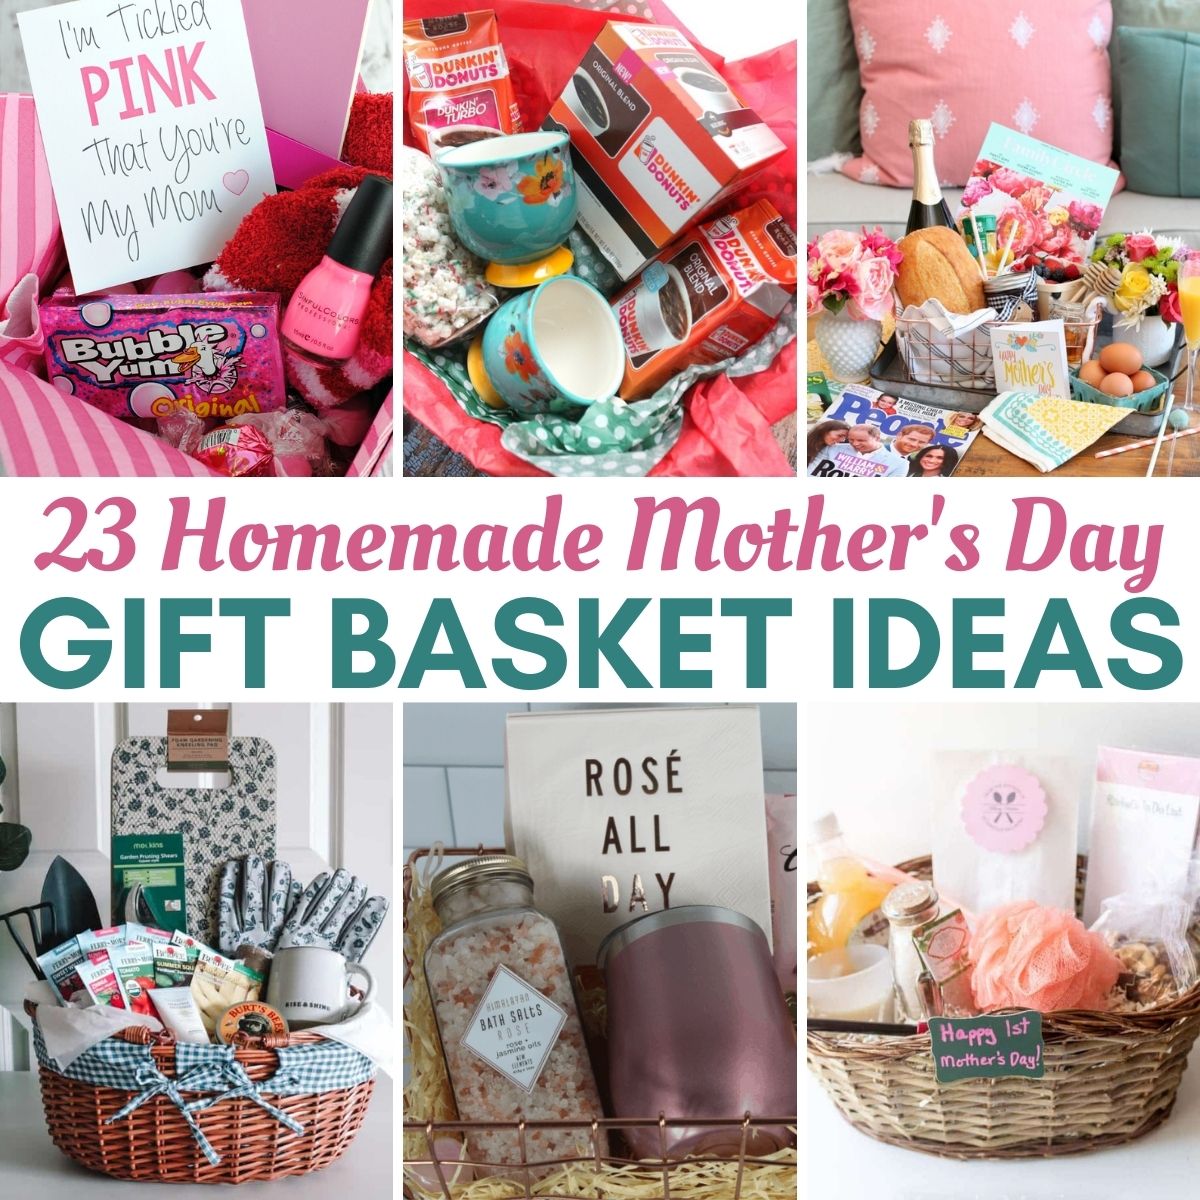 21 Mother's Day Edible Gift Baskets of Food 2023 | Mother's Day Recipes:  Brunch, Dinner, Desserts and More | Food Network